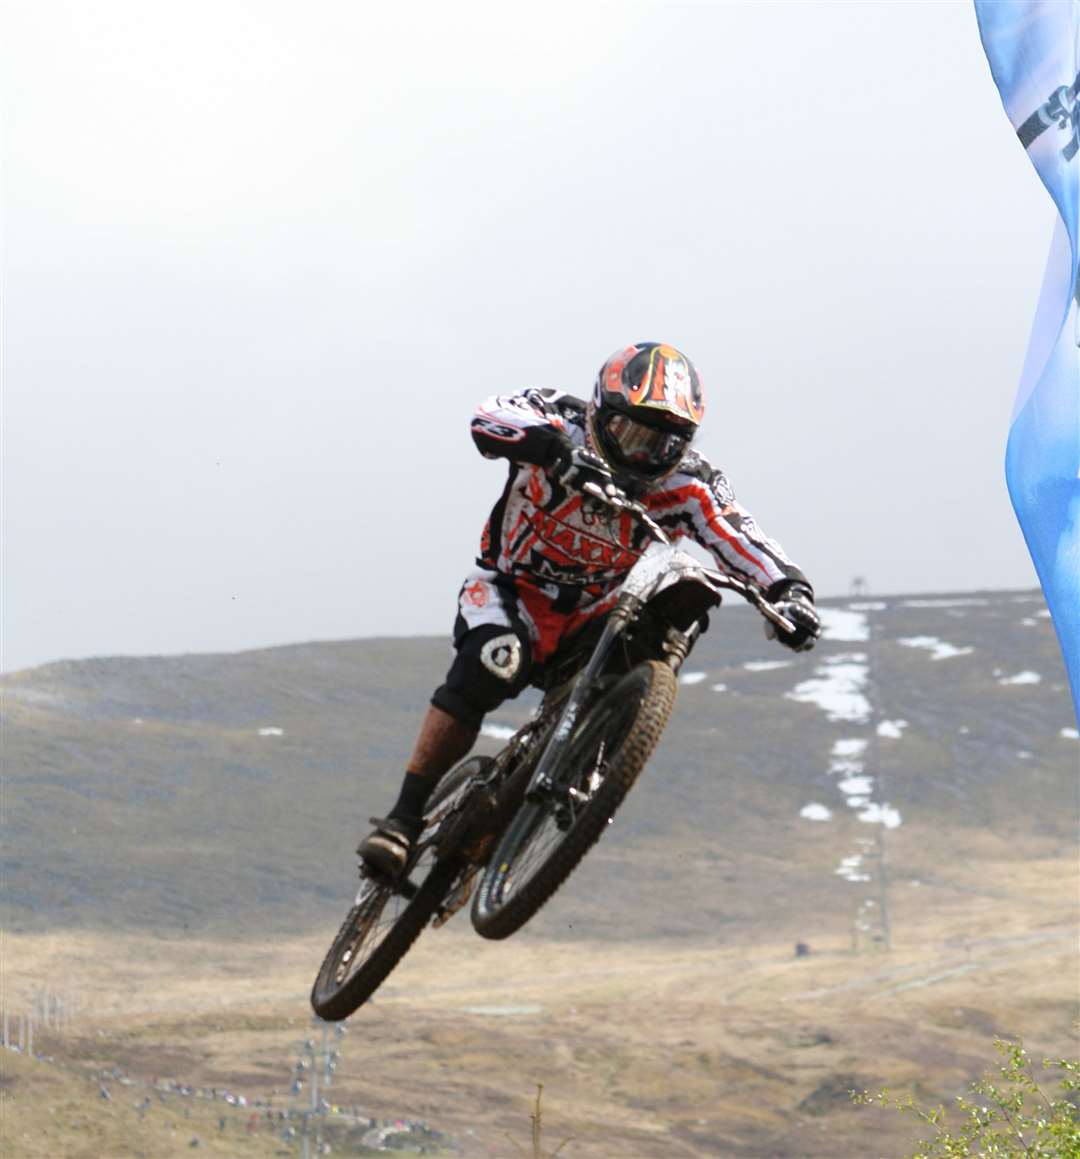 The 2019 UCI Fort William Mountain Bike World Cup takes place June 1-2.